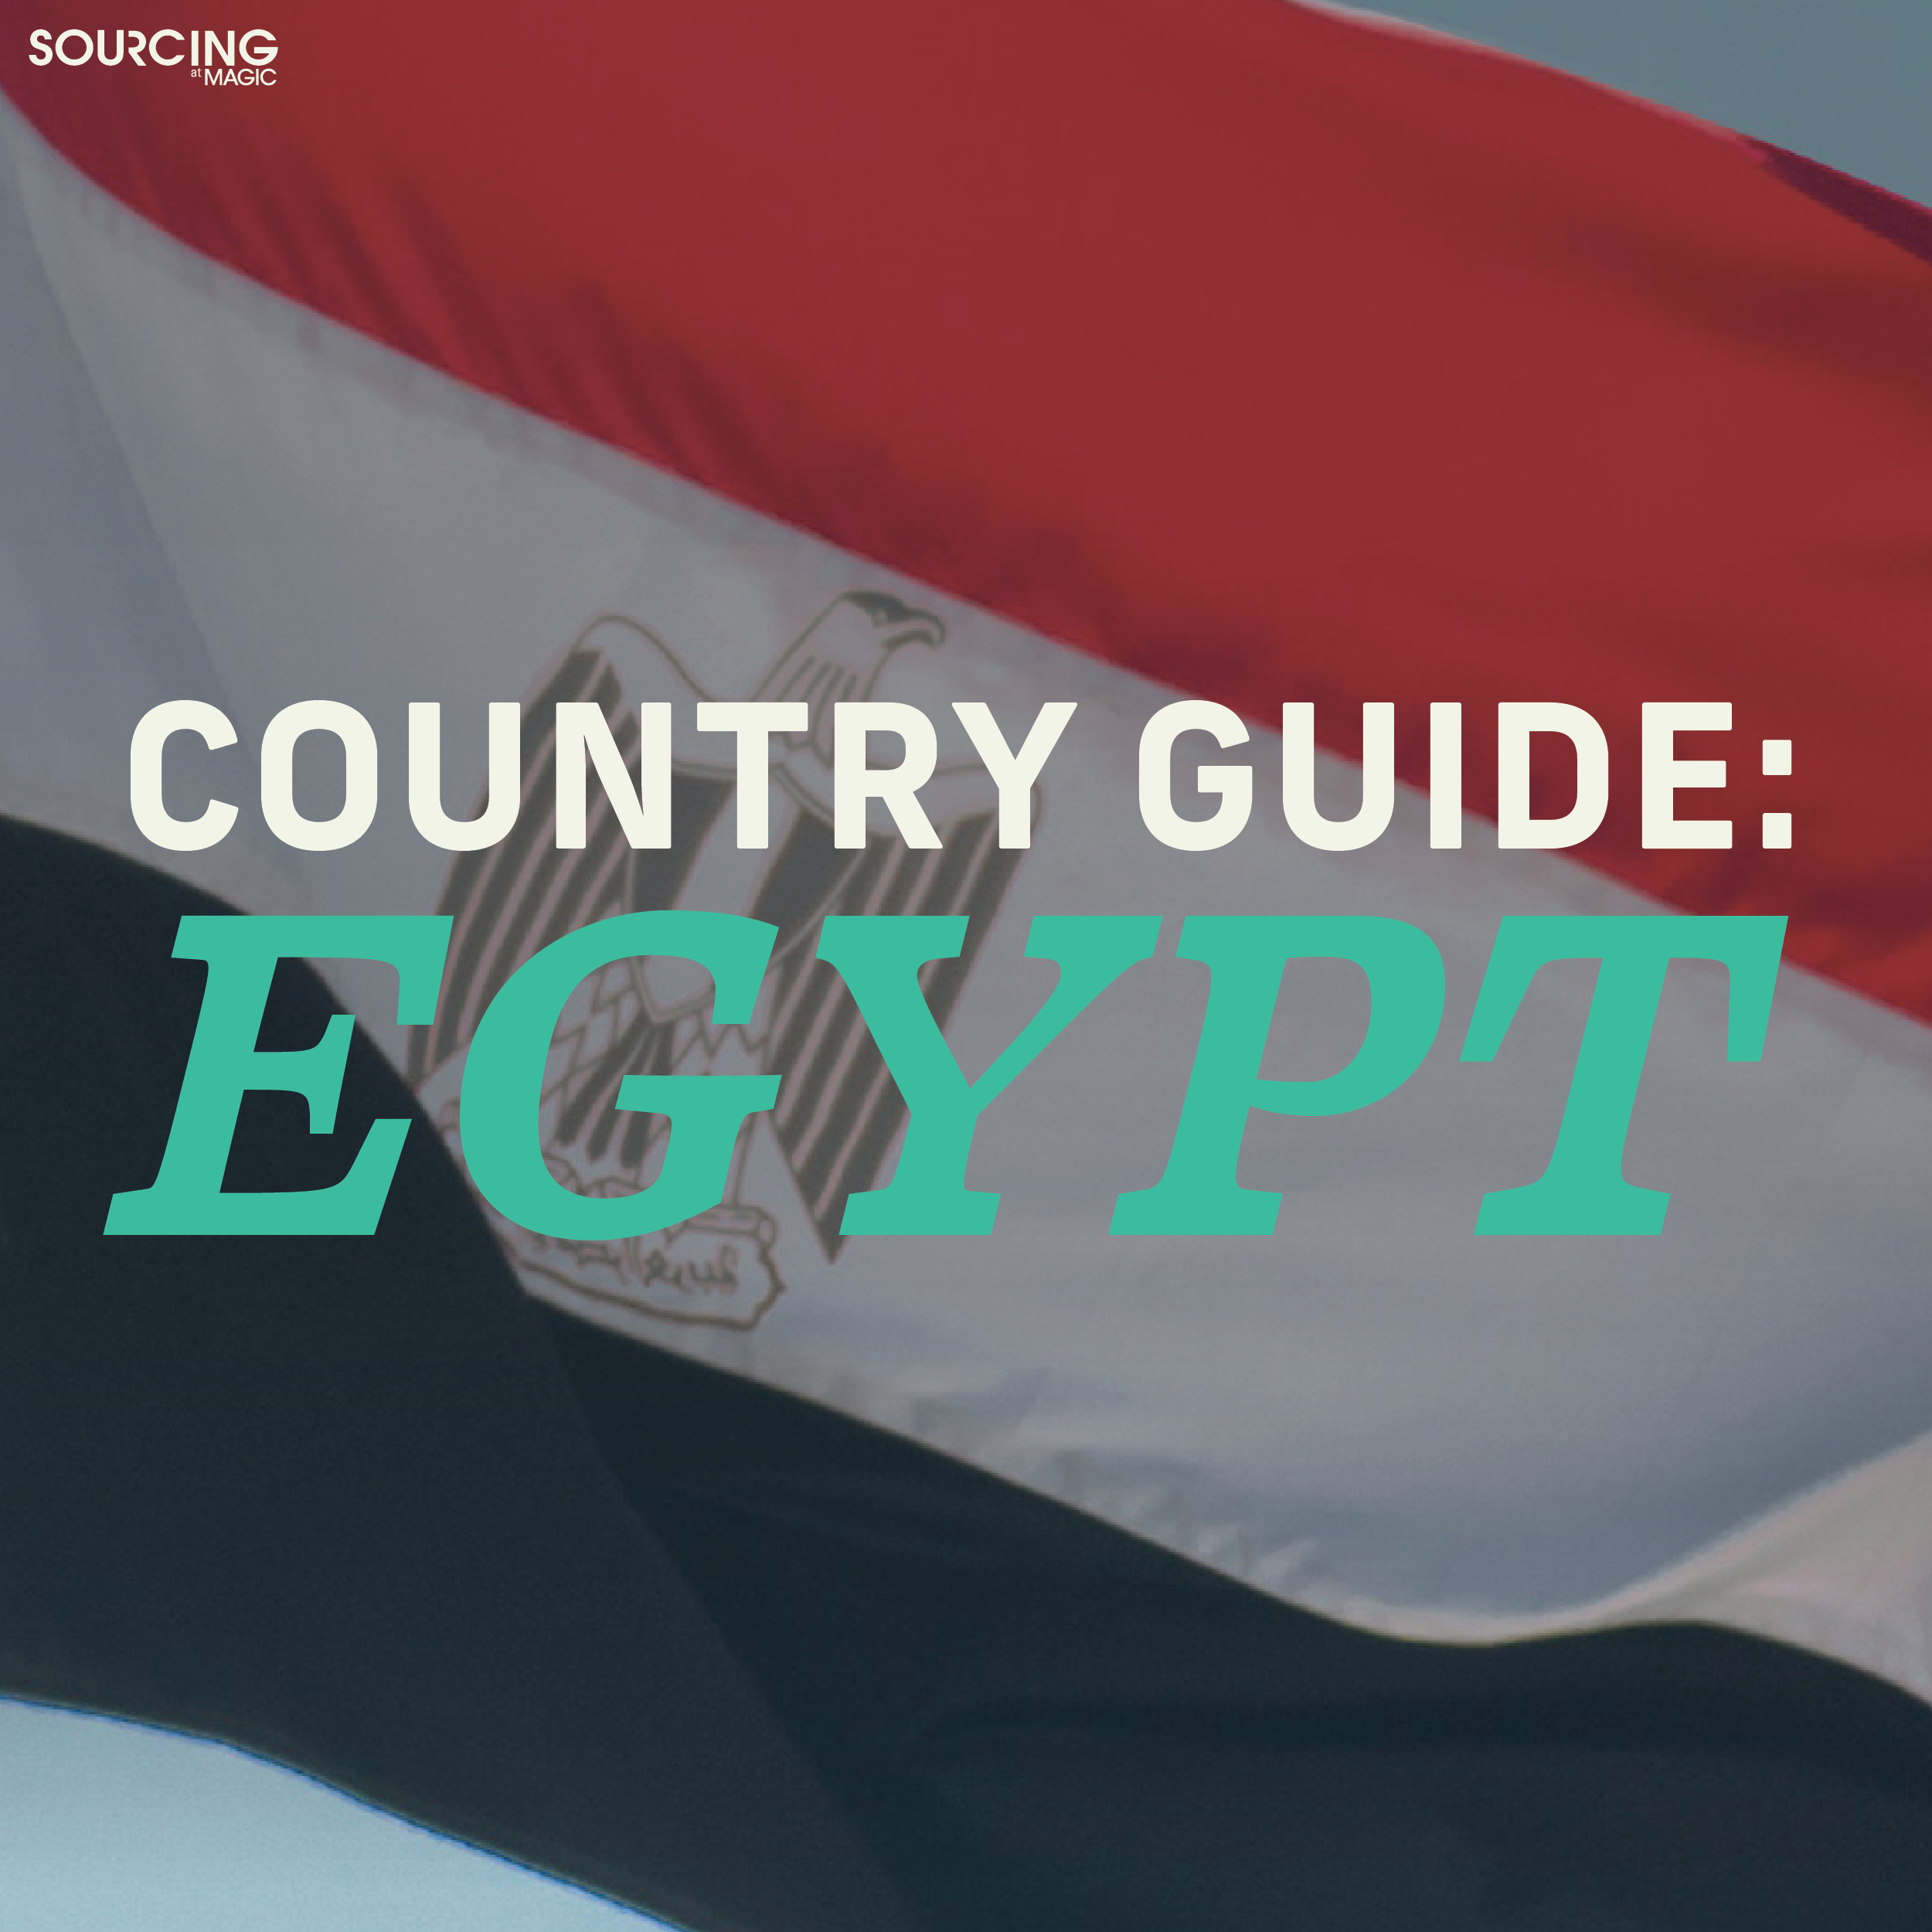 SOURCING at MAGIC: Country Guide - Egypt